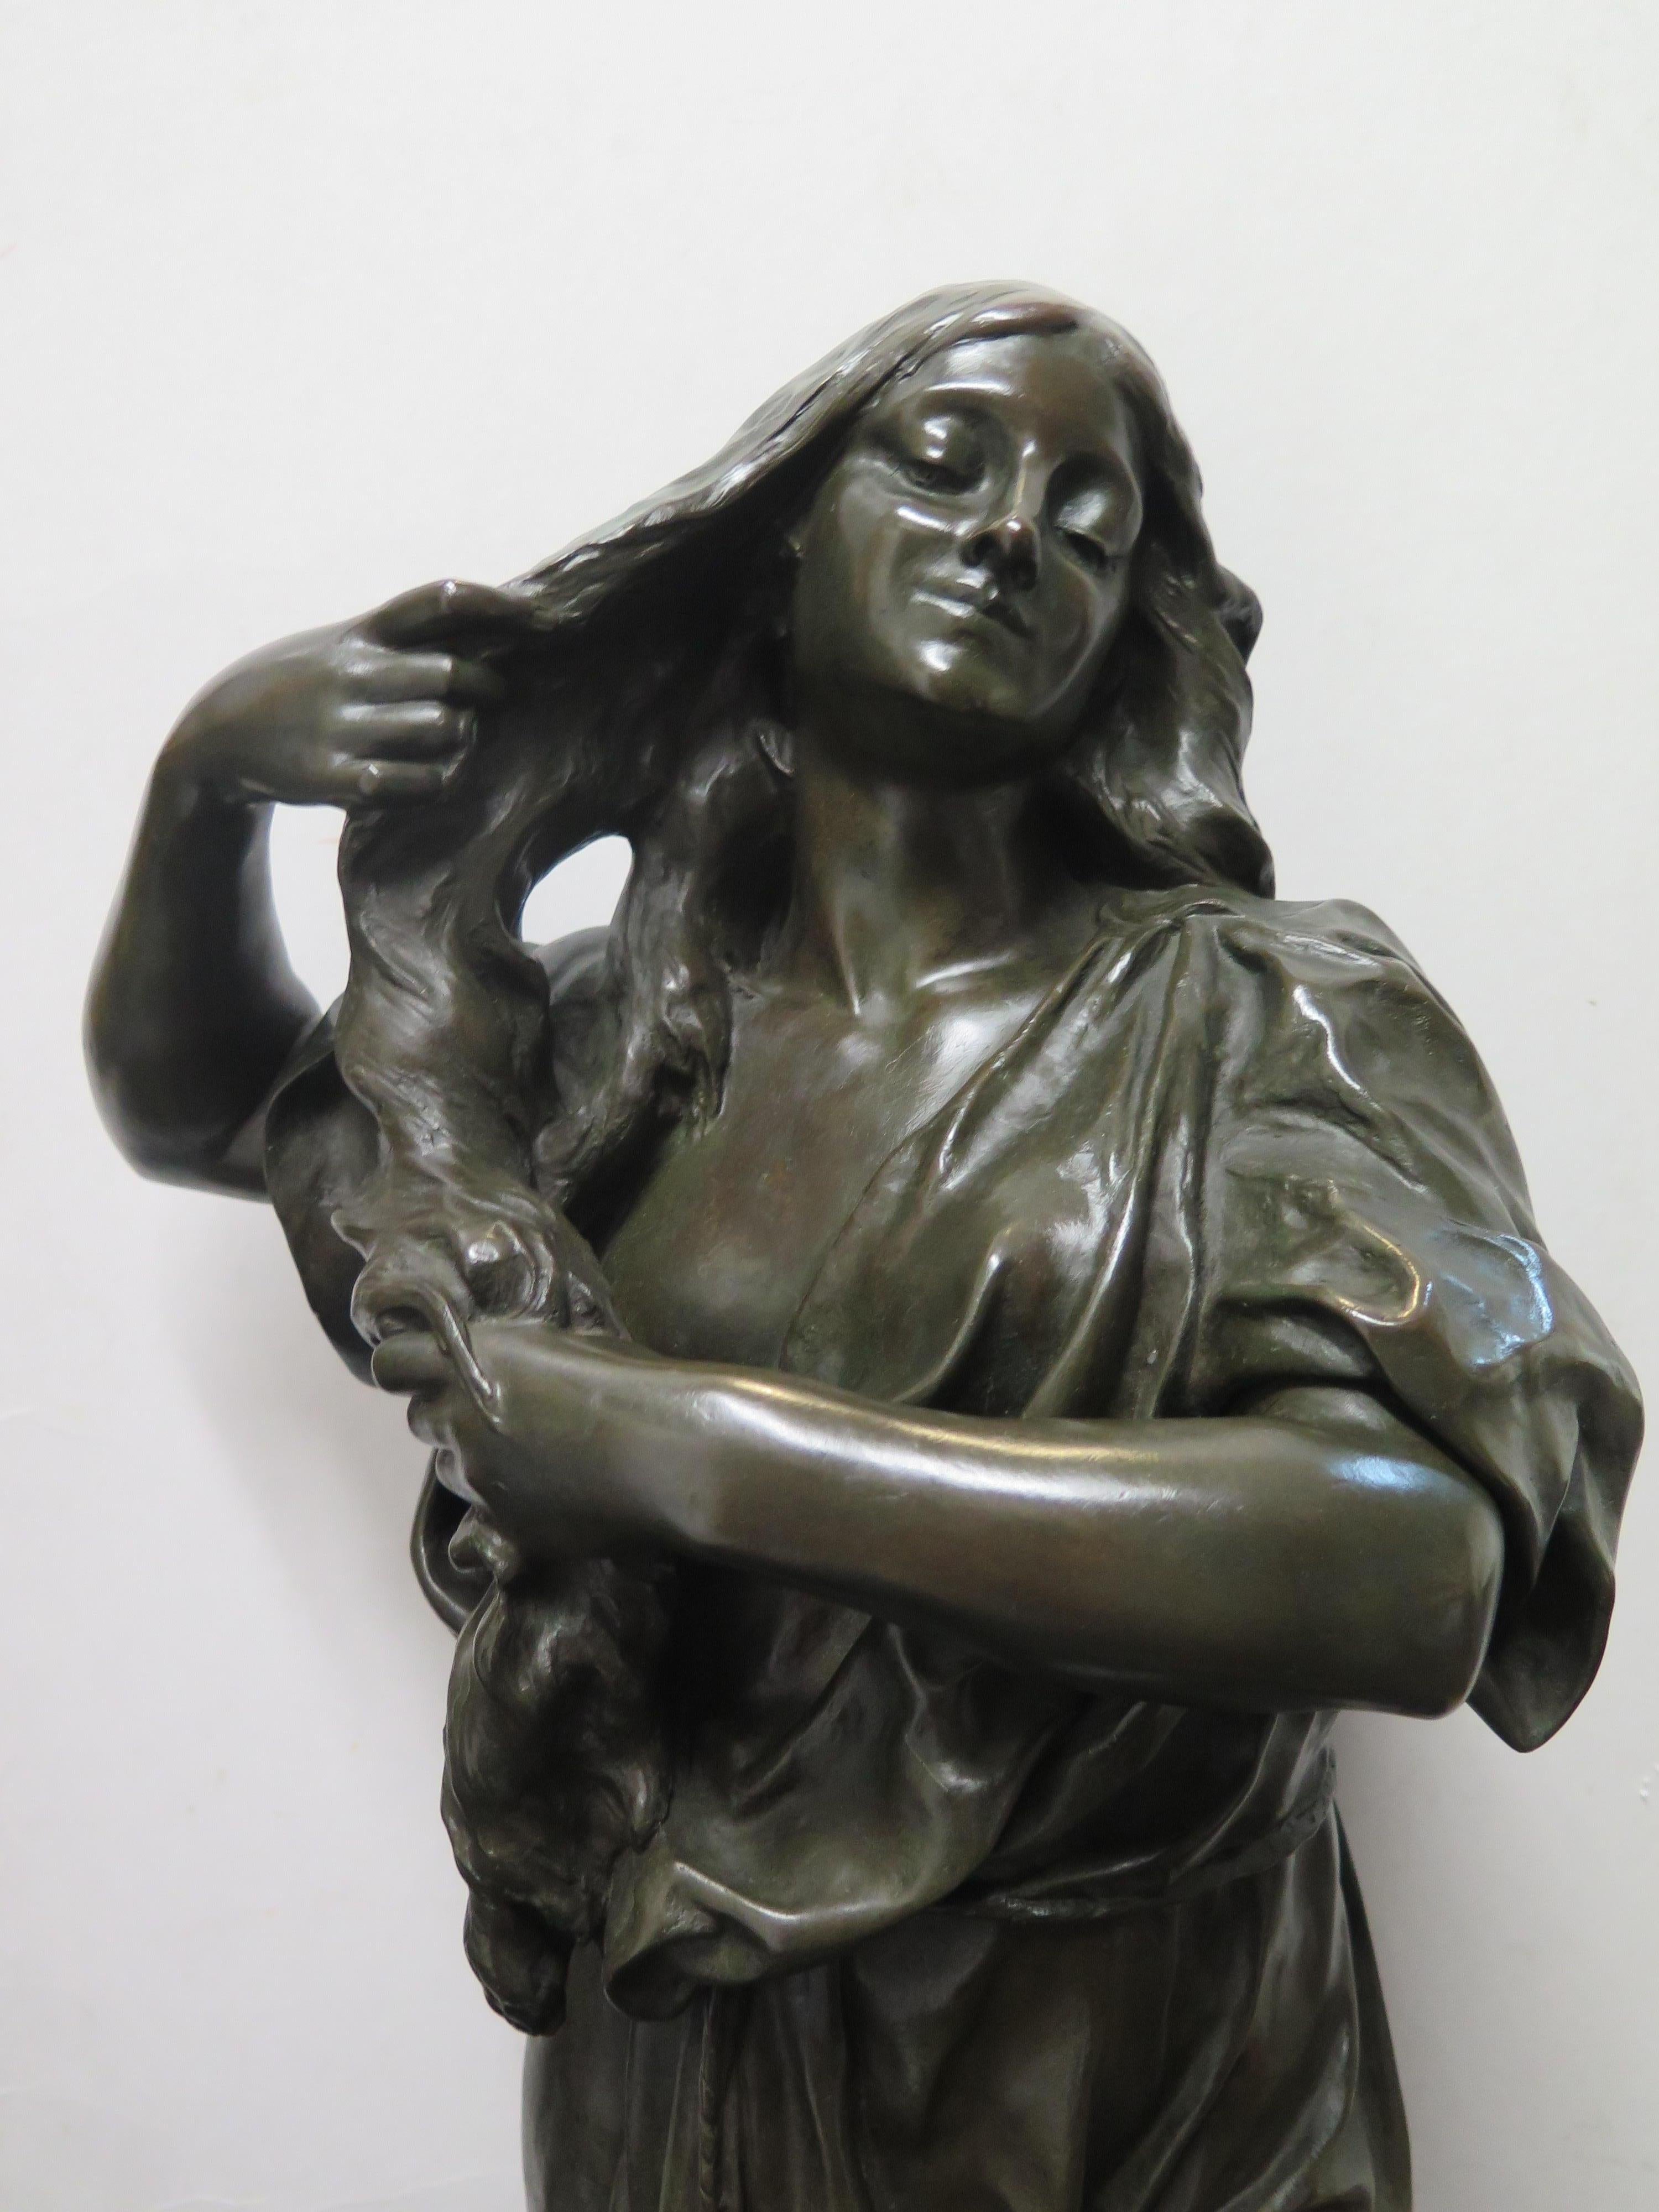 This stunning vintage late 19th century patinated bronze sculpture of a woman was created by Emile Peynot. The full figured “earthy” European woman in a loose fitting robe is positioned standing attempting to air dry her long hair. She is featured